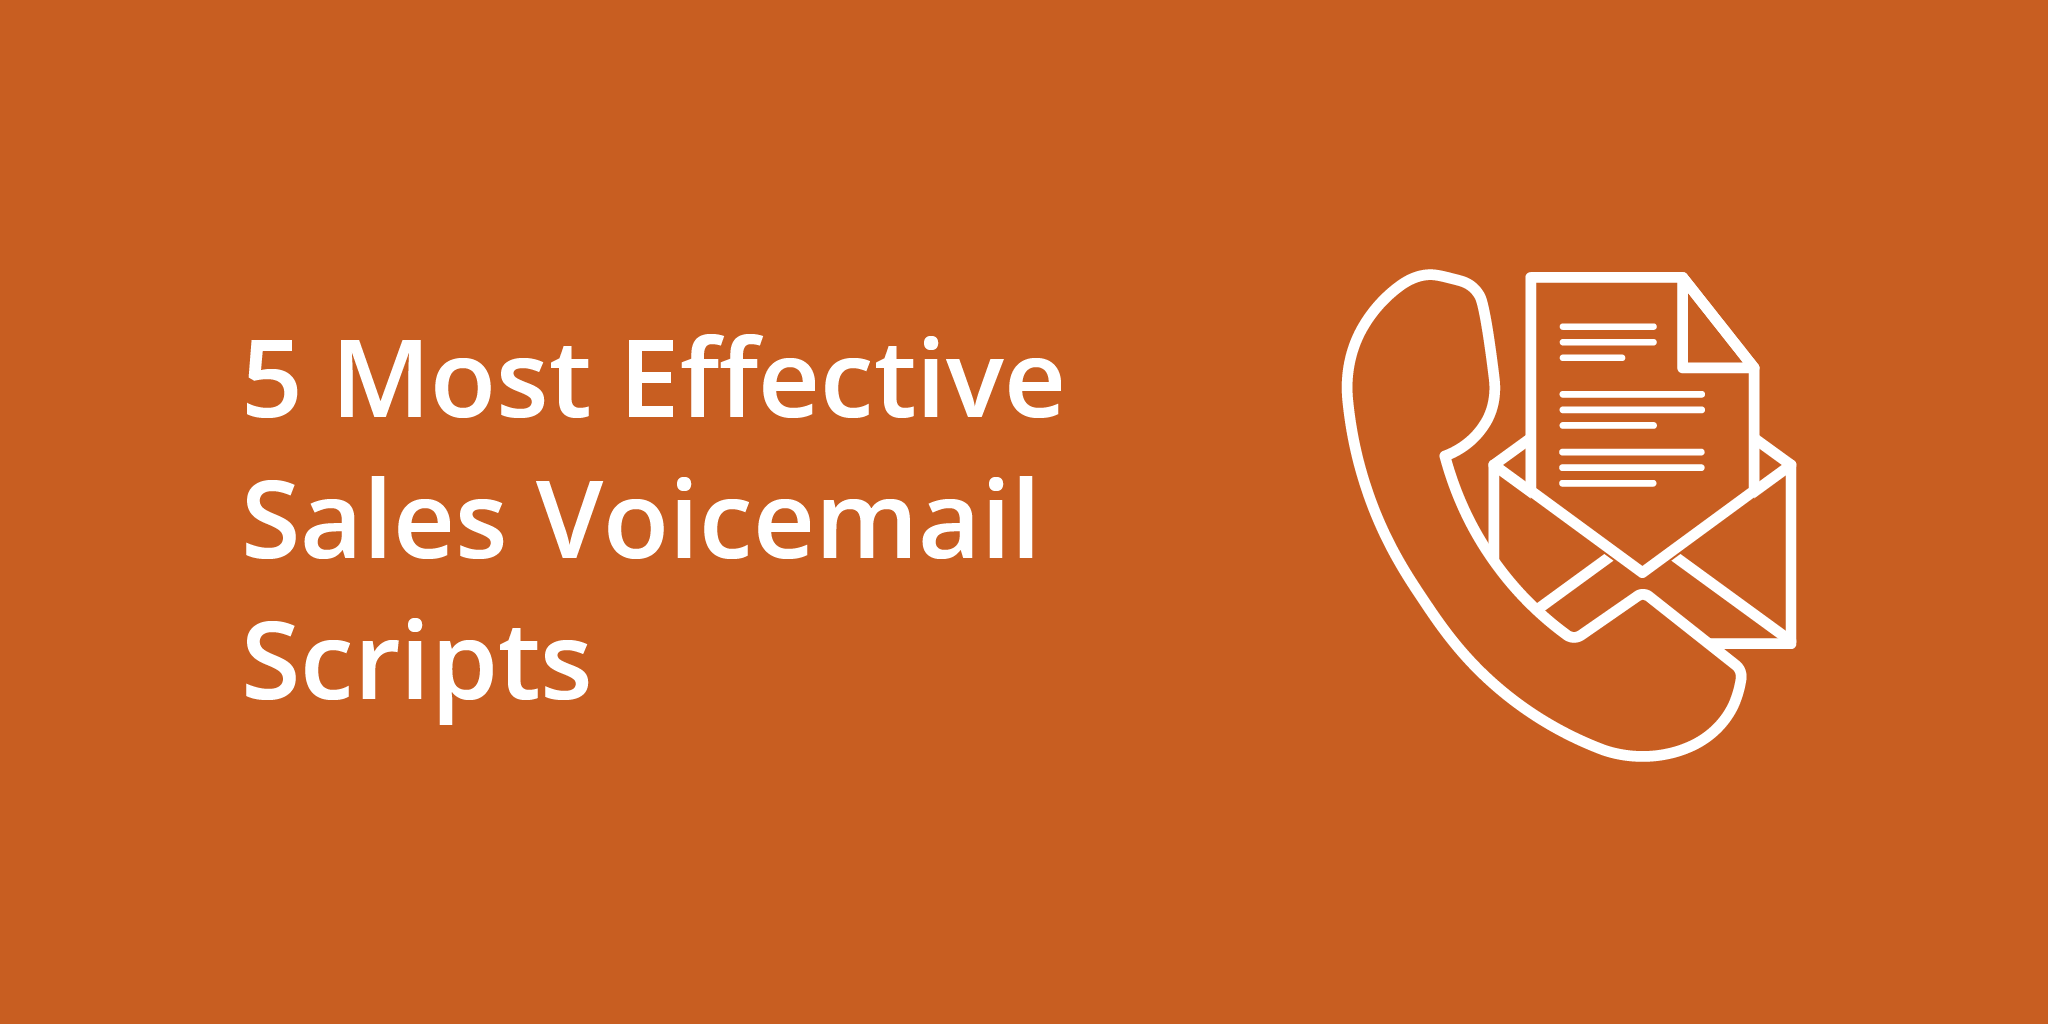 5 Most Effective Sales Voicemail Scripts | Telephones for business